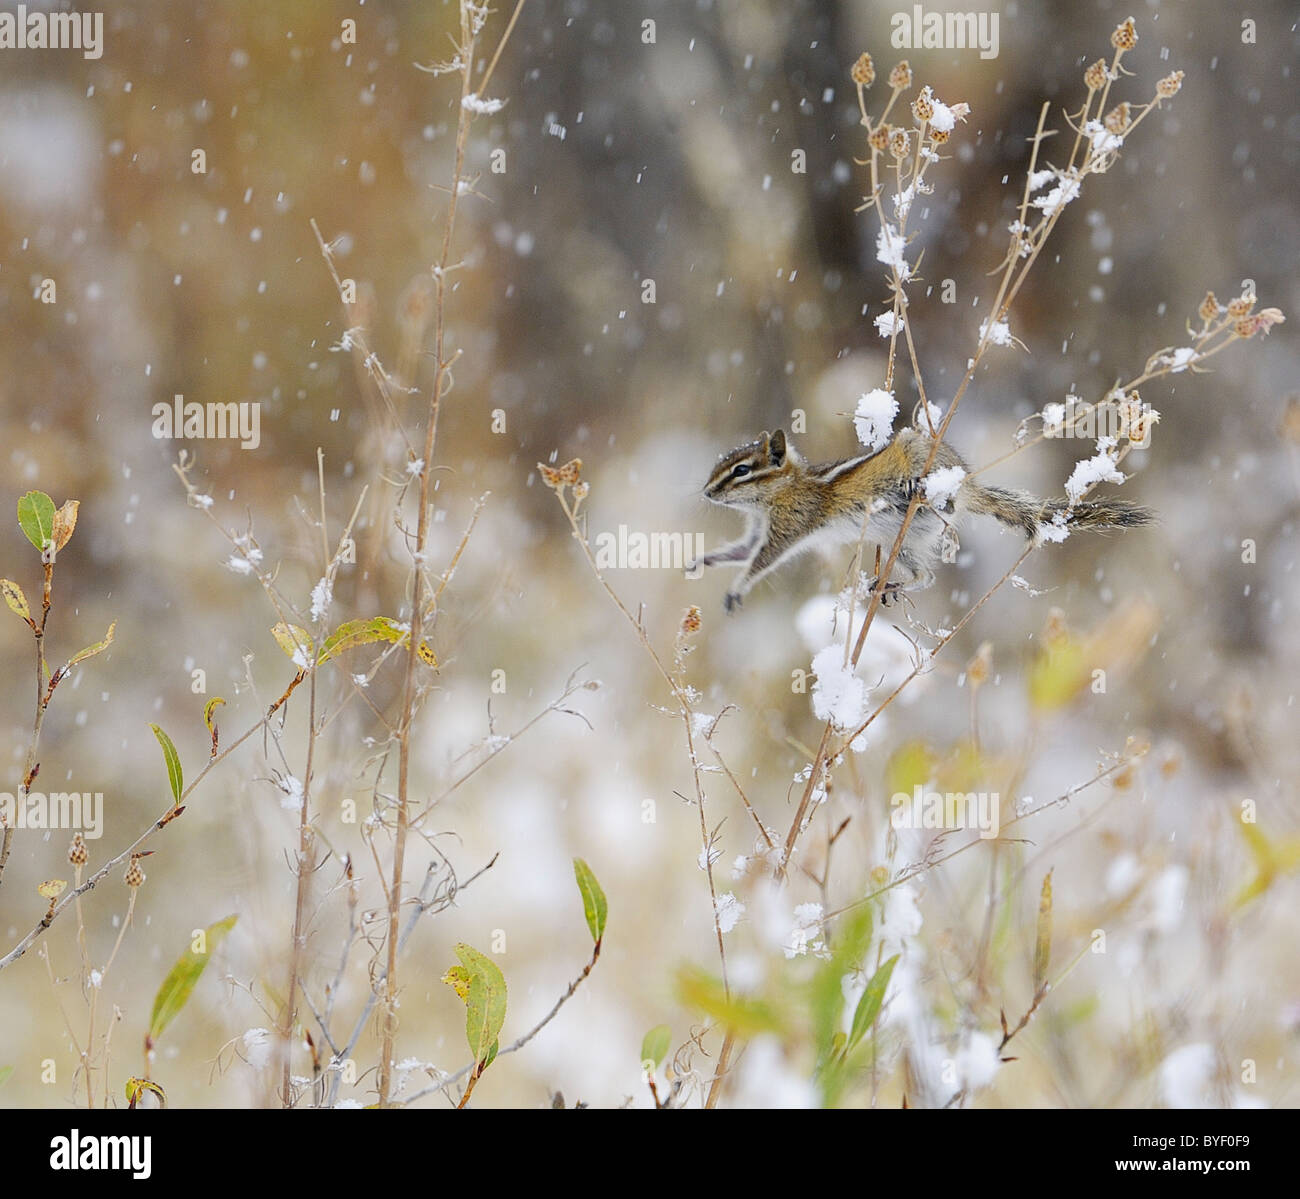 Least Chipmunk jumping stalks in low bushes during snowstorm. Stock Photo